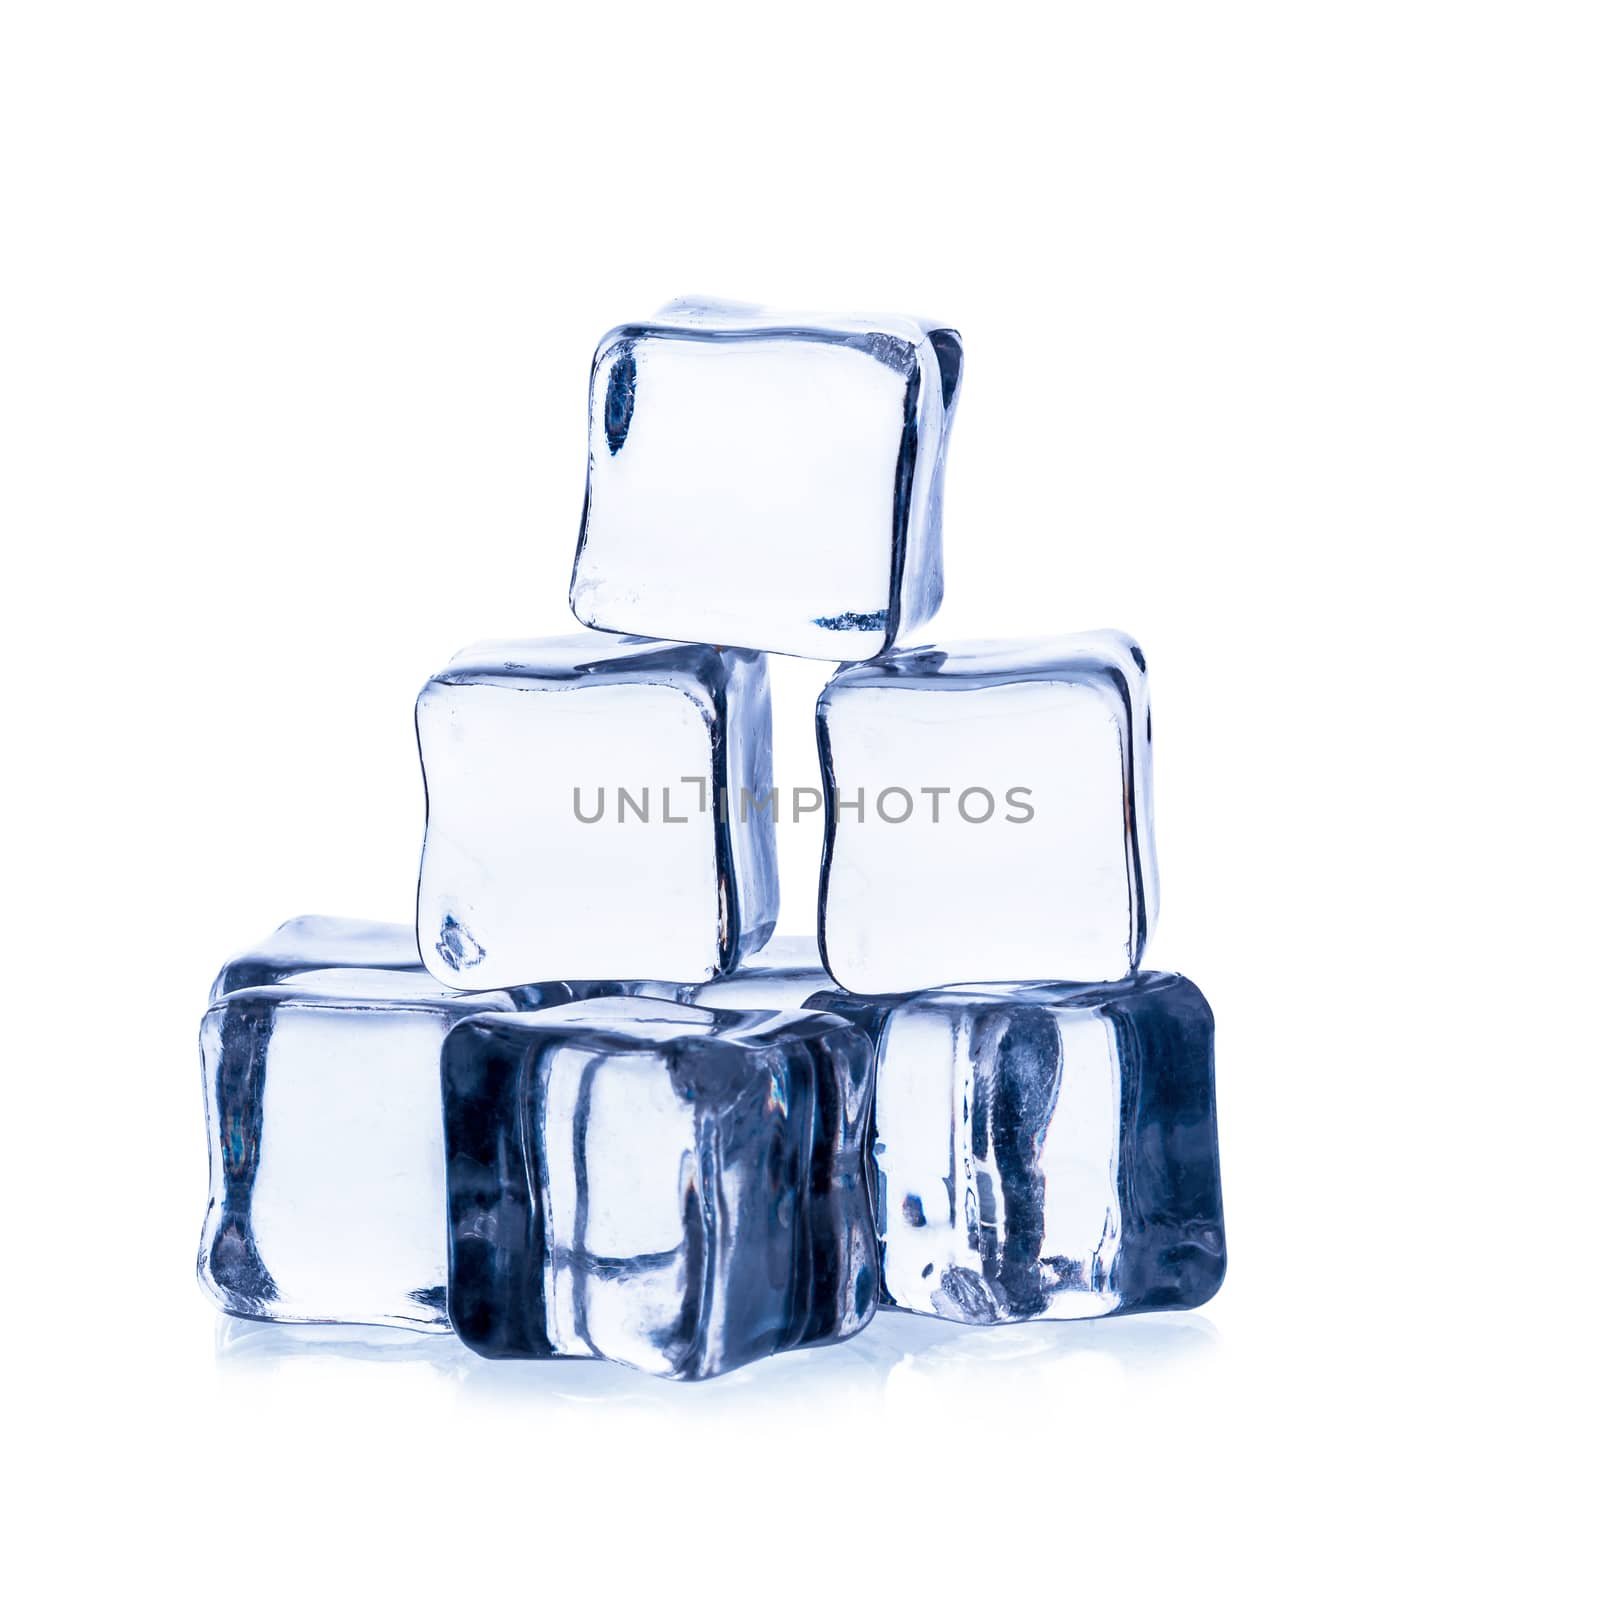 Ice cubes on a white background.